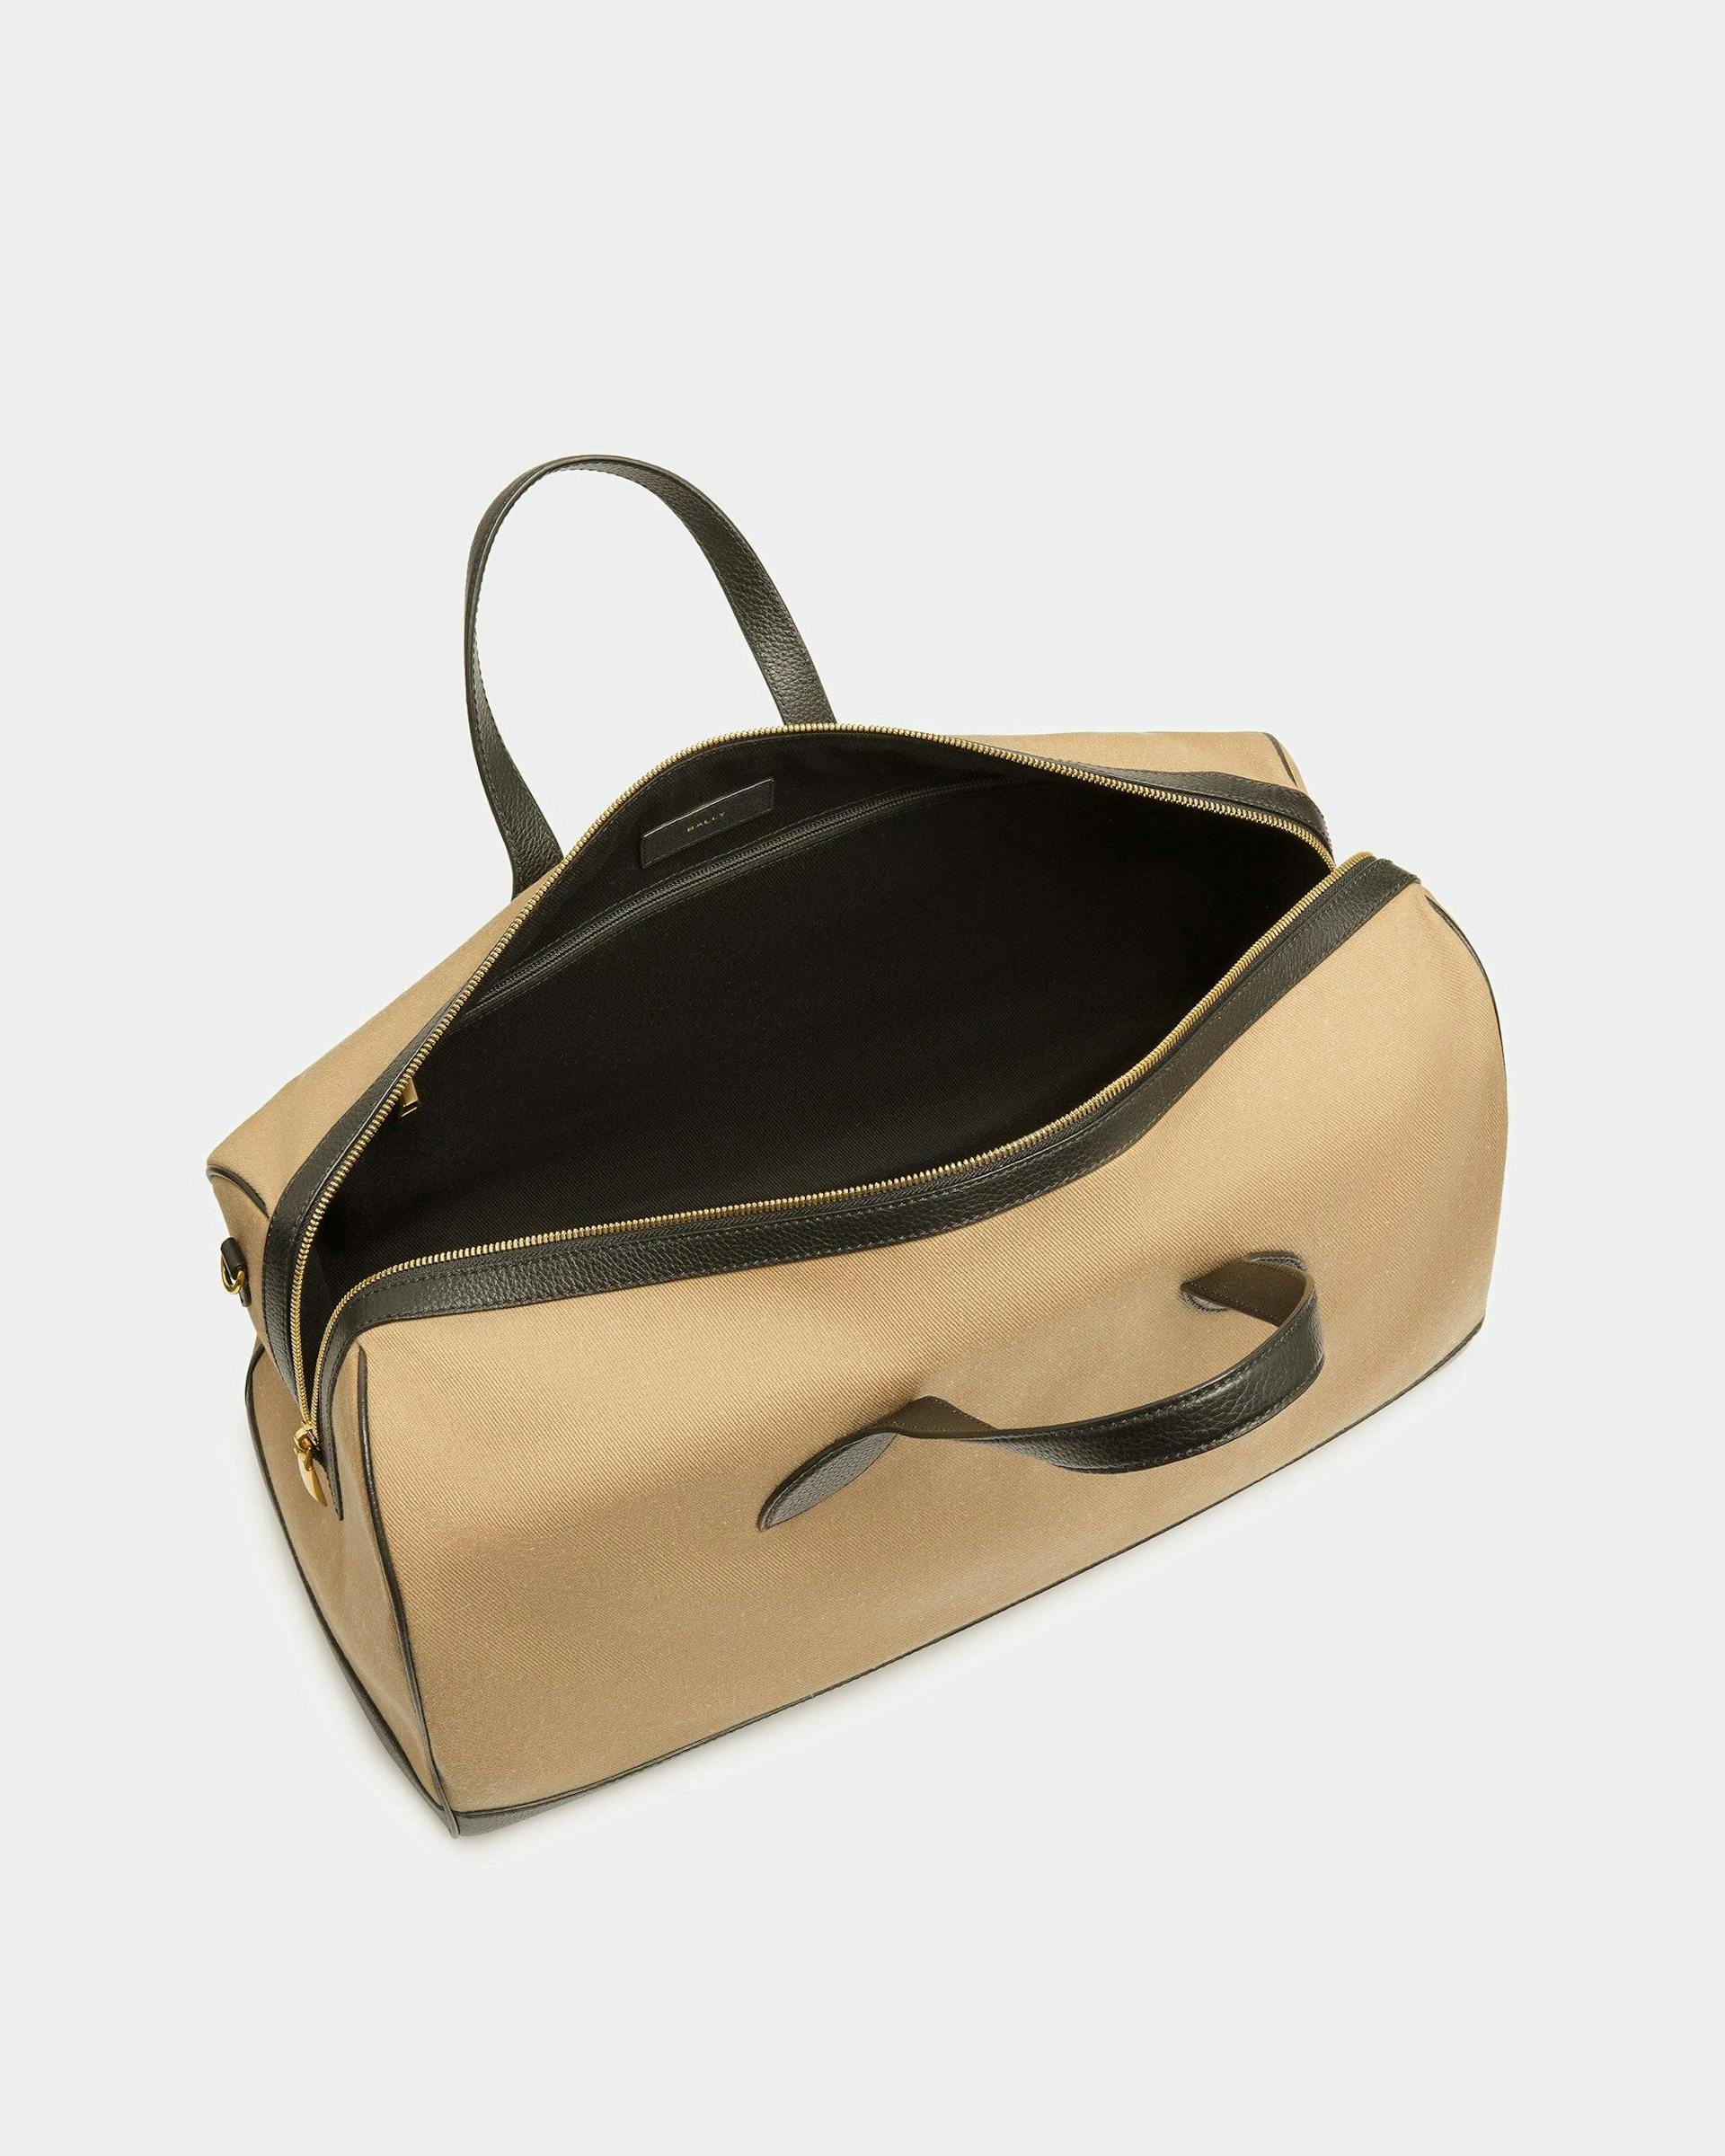 Men's Bar Weekender In Sand And Black Fabric And Leather | Bally | Still Life Open / Inside